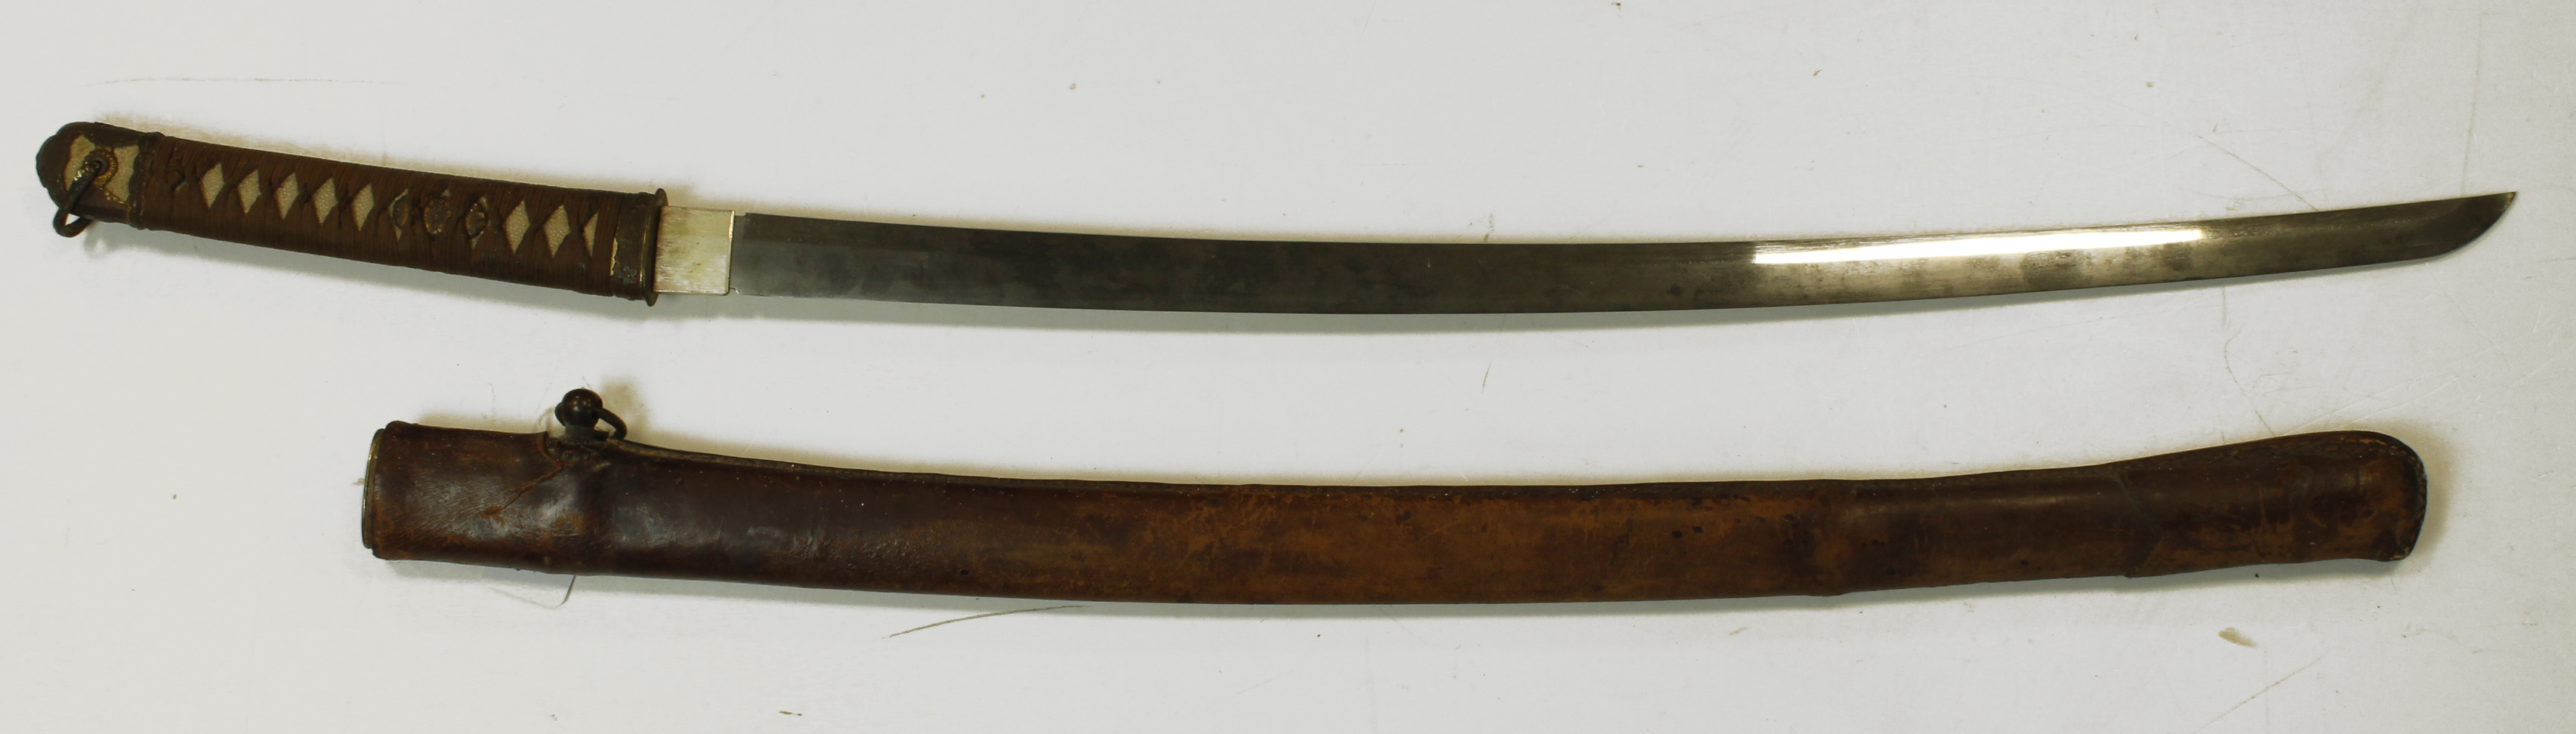 Japanese Sword with scabbard and leather cover, tang signed, blade approx 26"